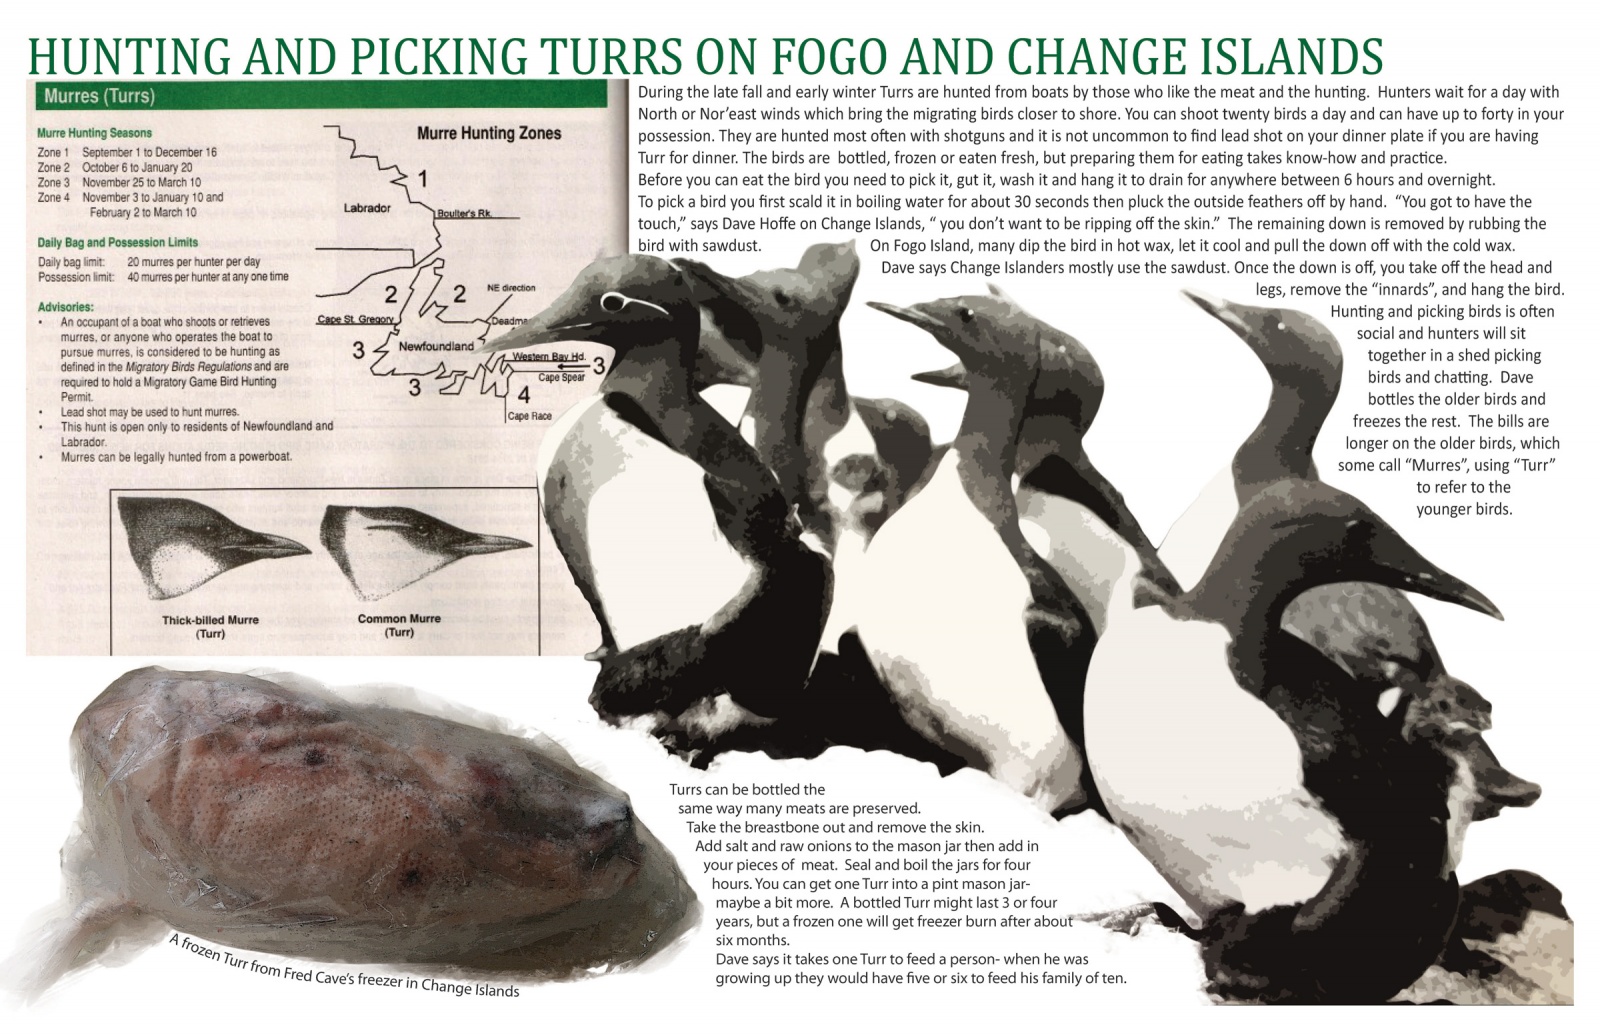 Hunting and Picking Turrs on Fogo and Change Islands